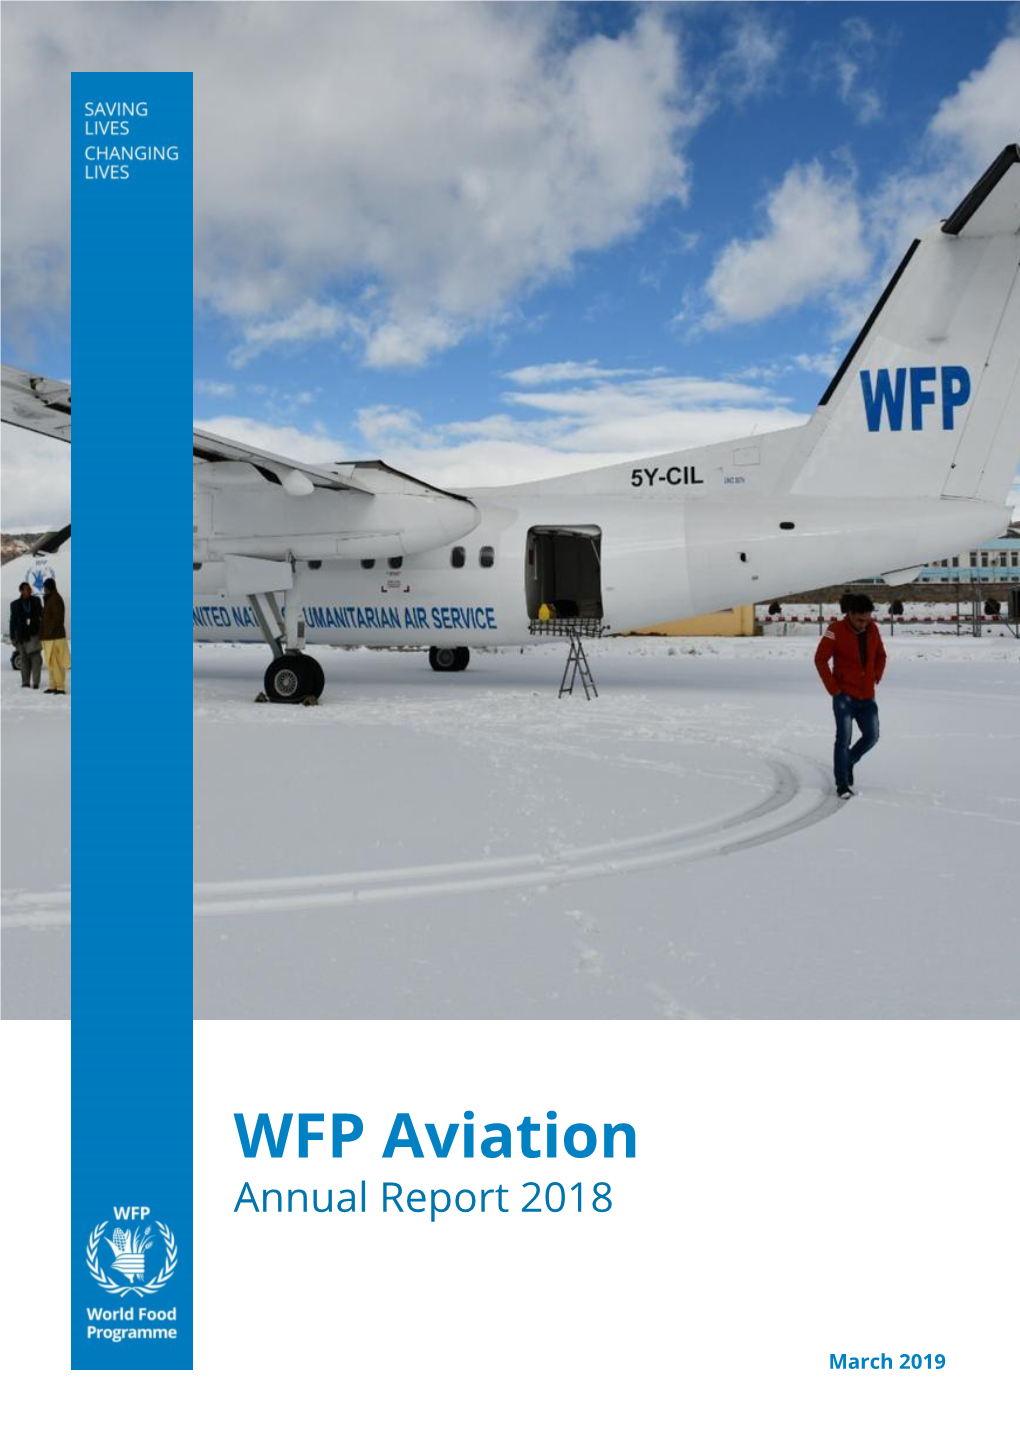 WFP Aviation Annual Report 2018